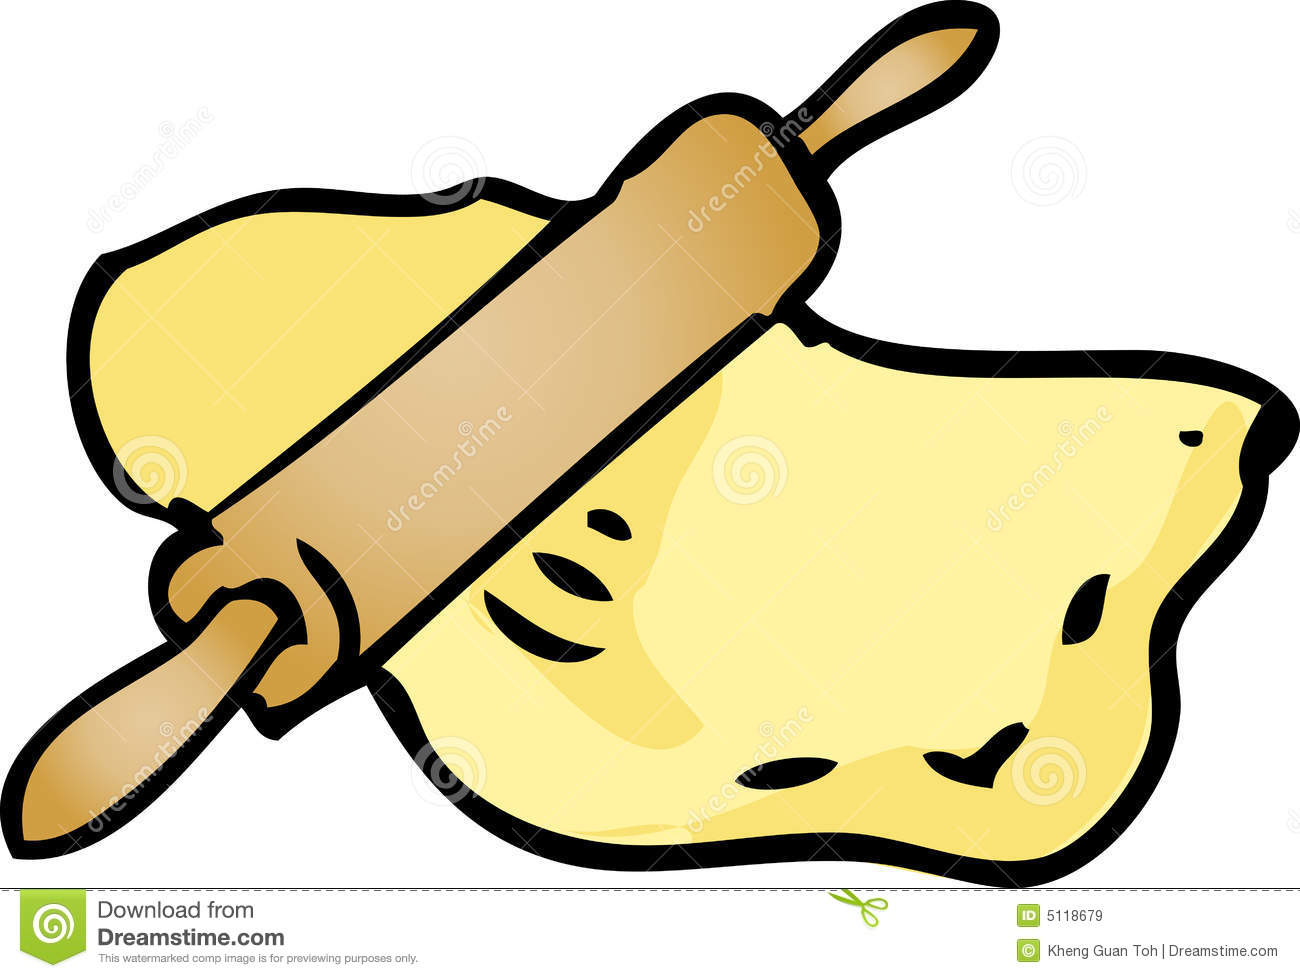 Rolling Dough Illustration Royalty Free Stock Images   Image  5118679